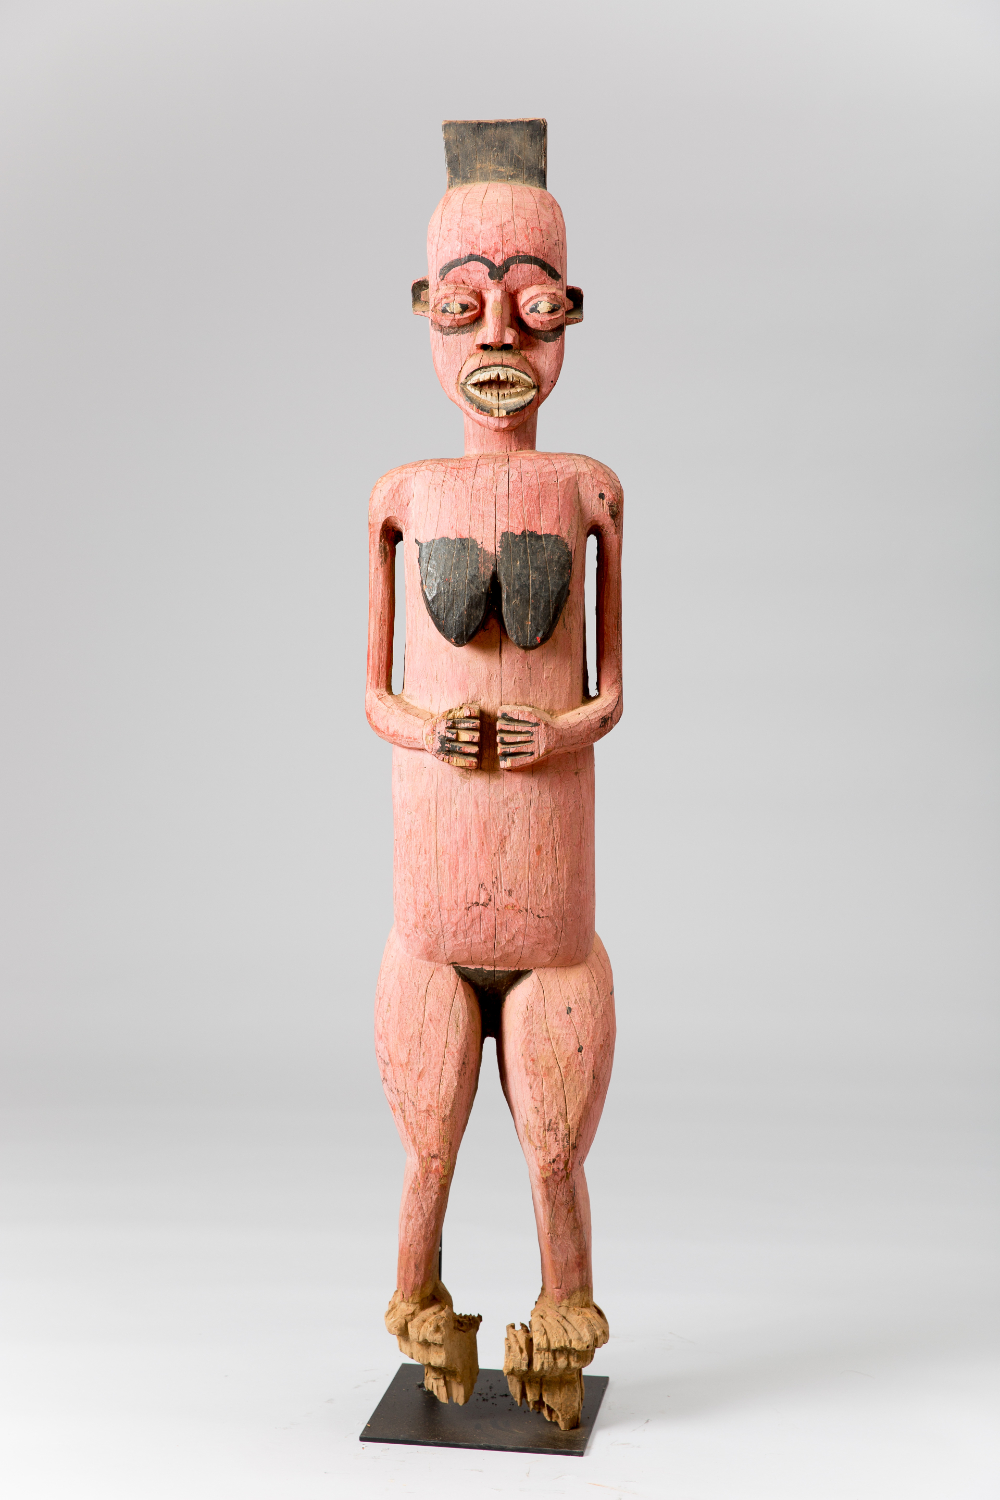 thumbnail of Female Figure from Northwestern Grassfields: Nkambe. medium: Wood, pigments. date: early 20th century